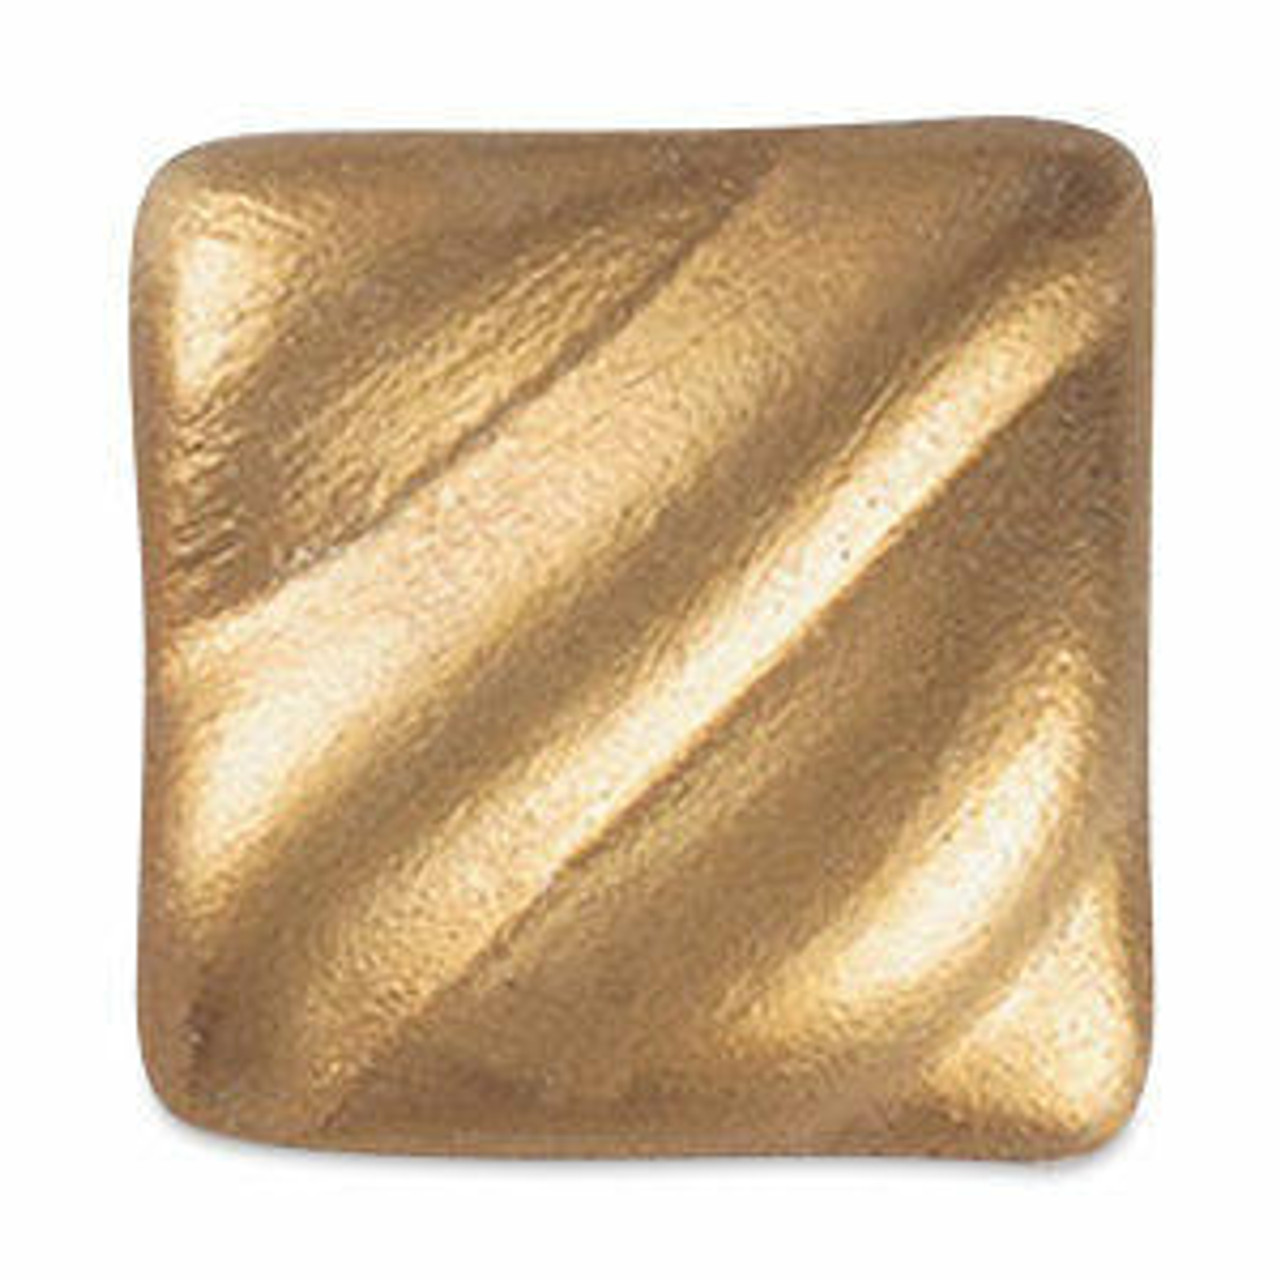 File:Gold metallic finish clean smooth seamless metal surface sheet  texture.jpg - Wikimedia Commons